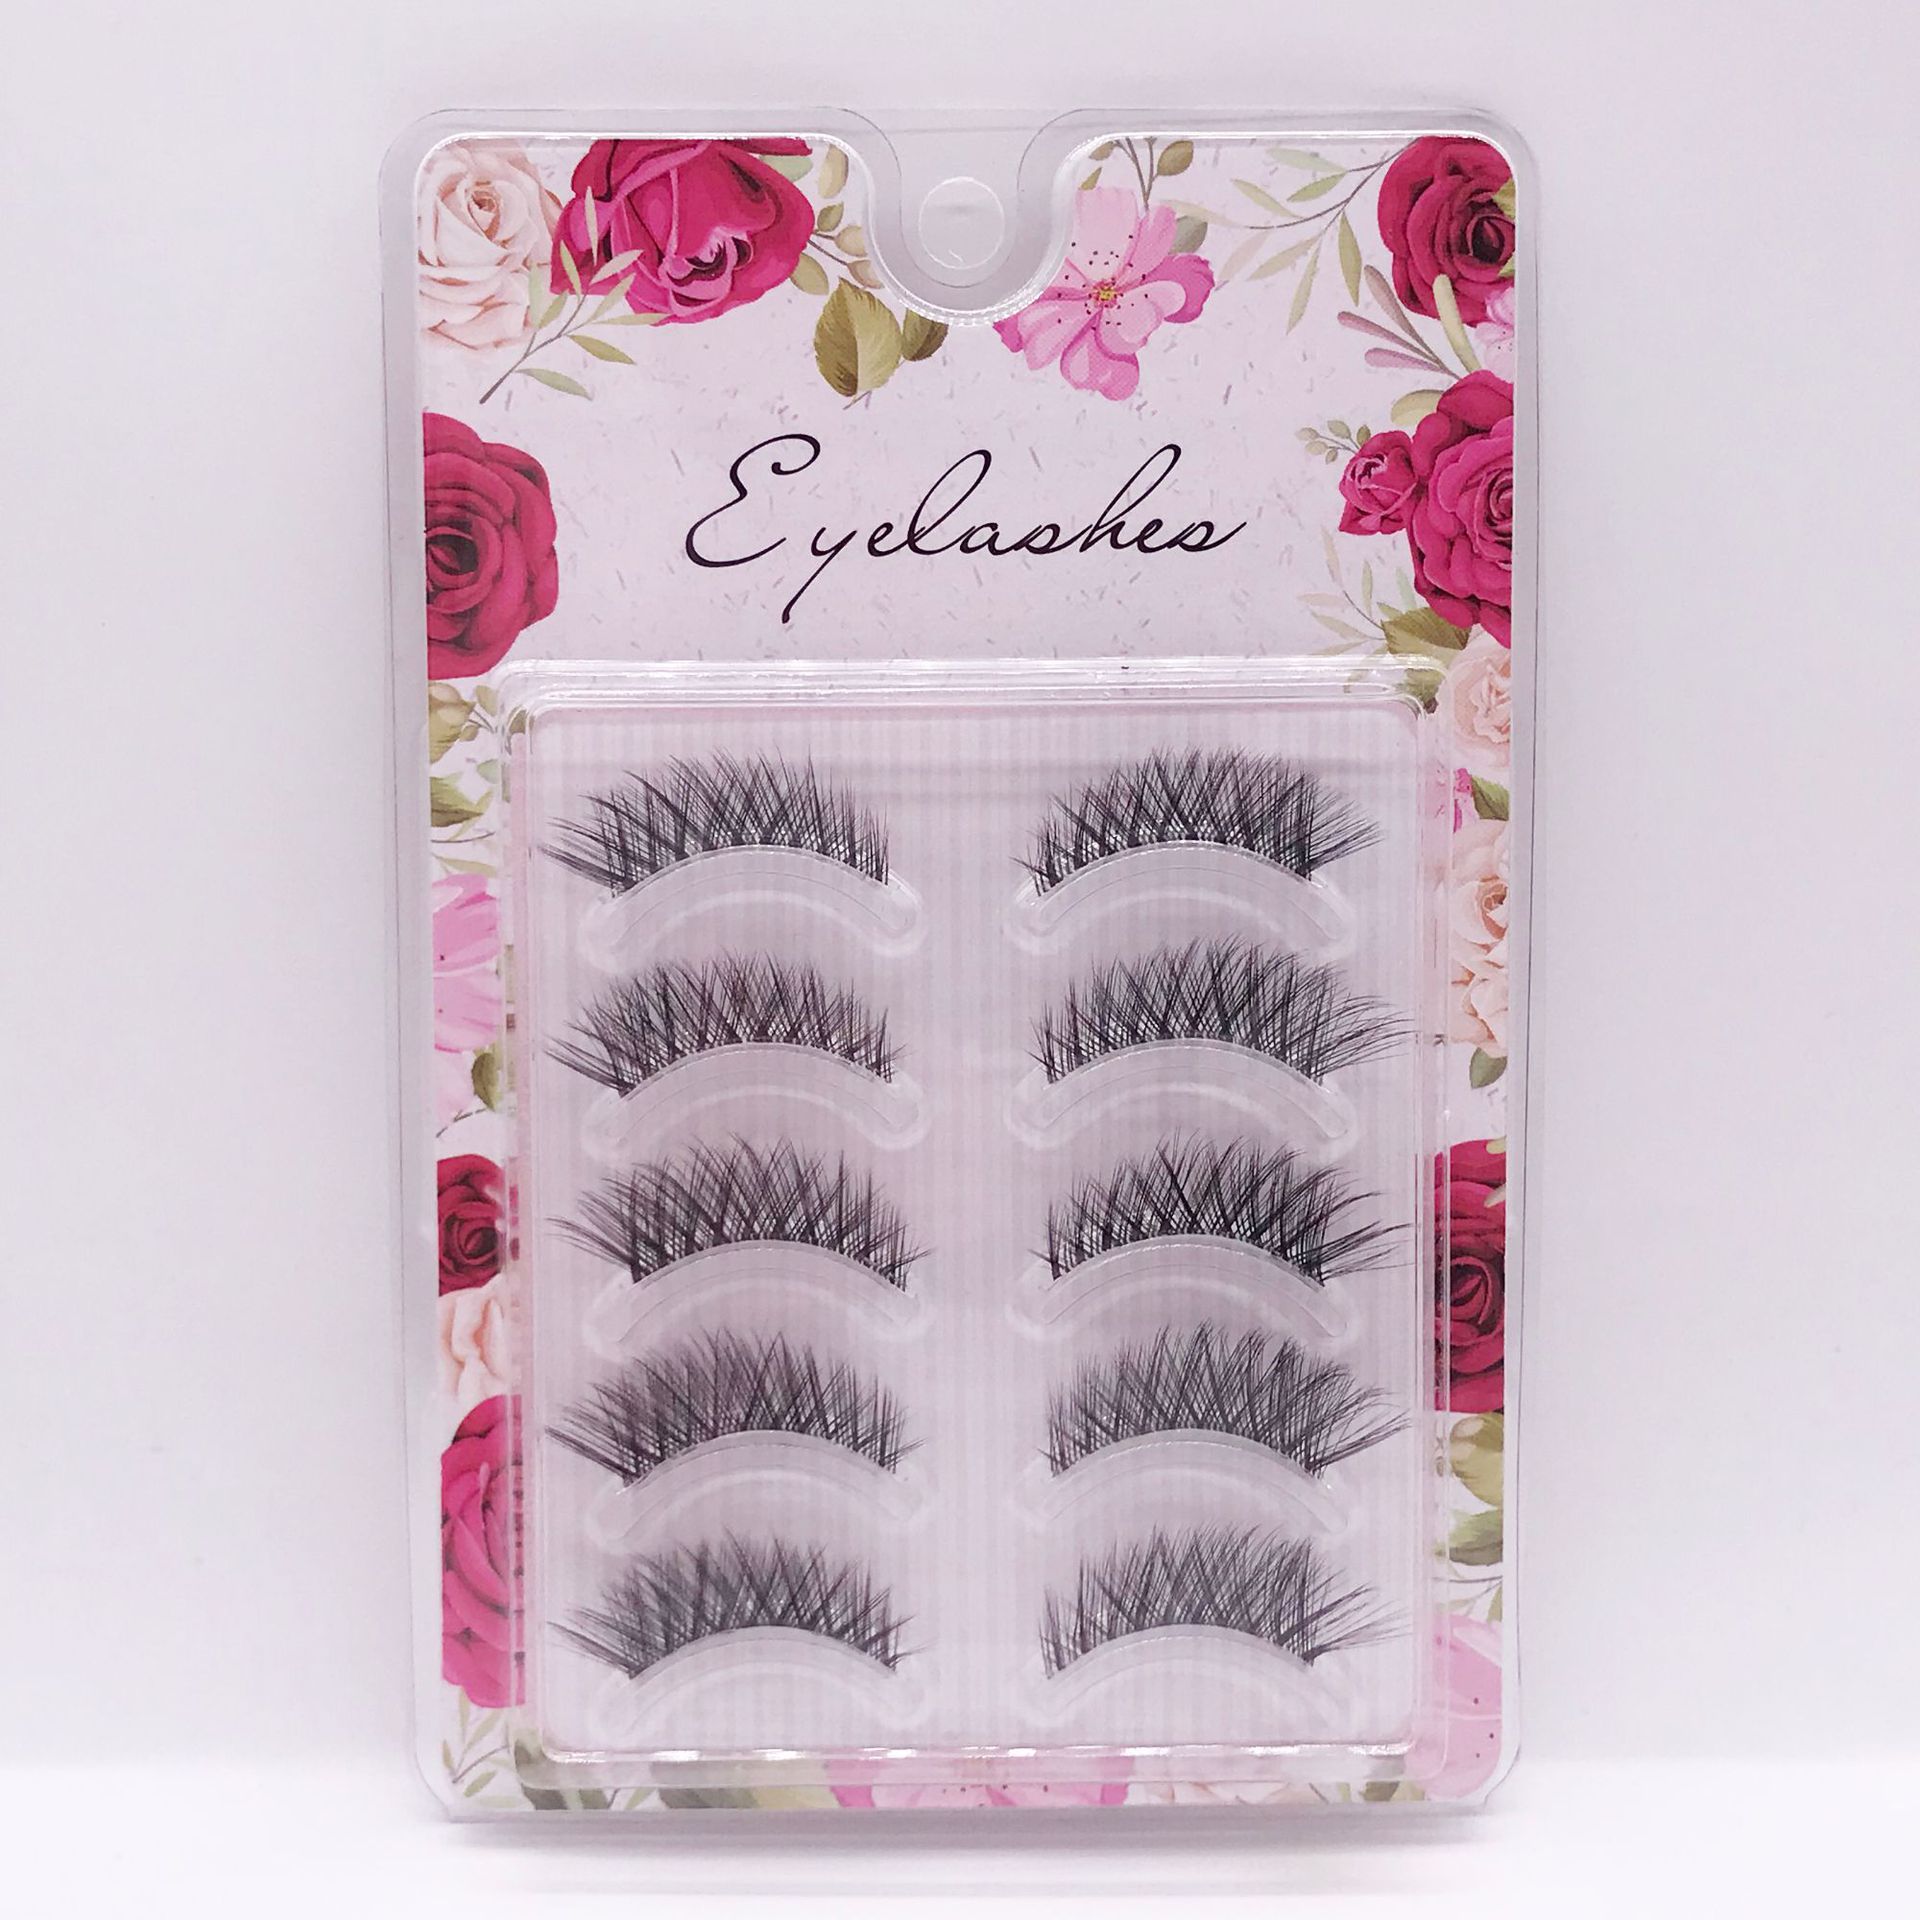 Factory Wholesale Sheer Root Sharpened False Eyelashes 5 Pairs Comfortable and Easy to Wear More than Eyelash in Stock